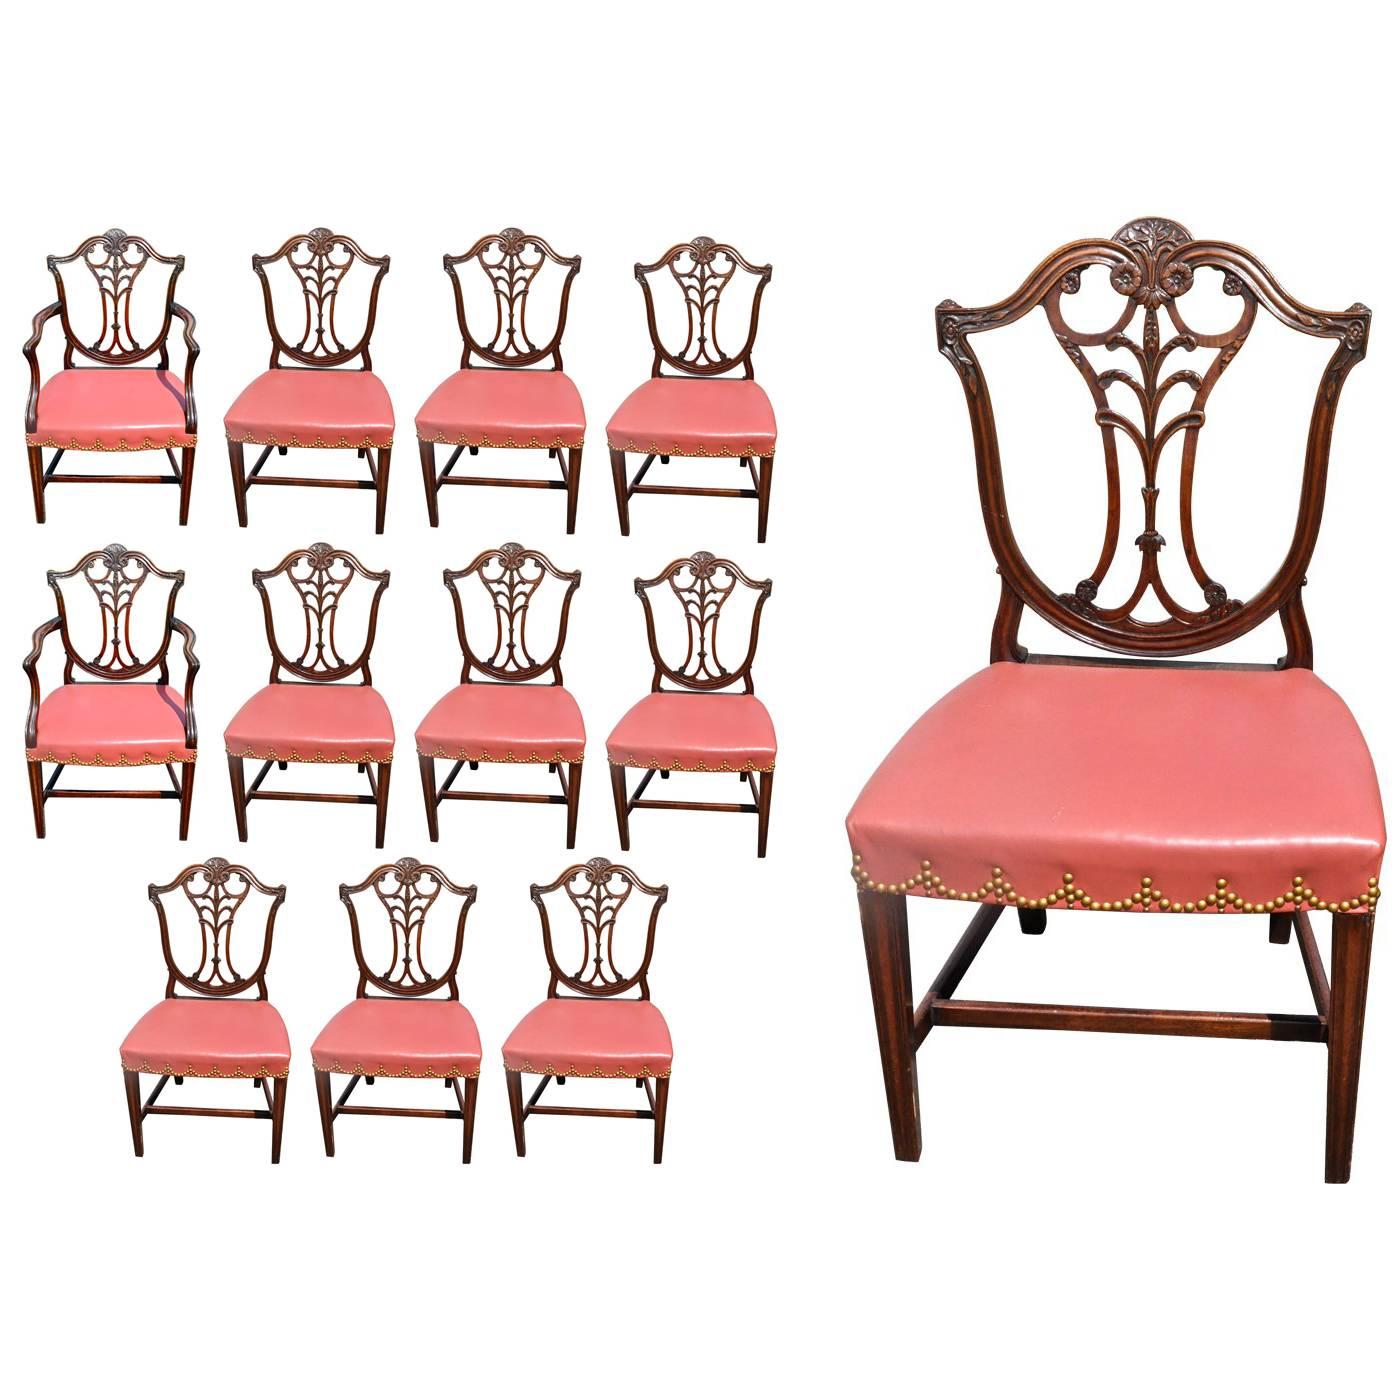 Set of 12 Georgian Neoclassical Dining Chairs in Mahogany